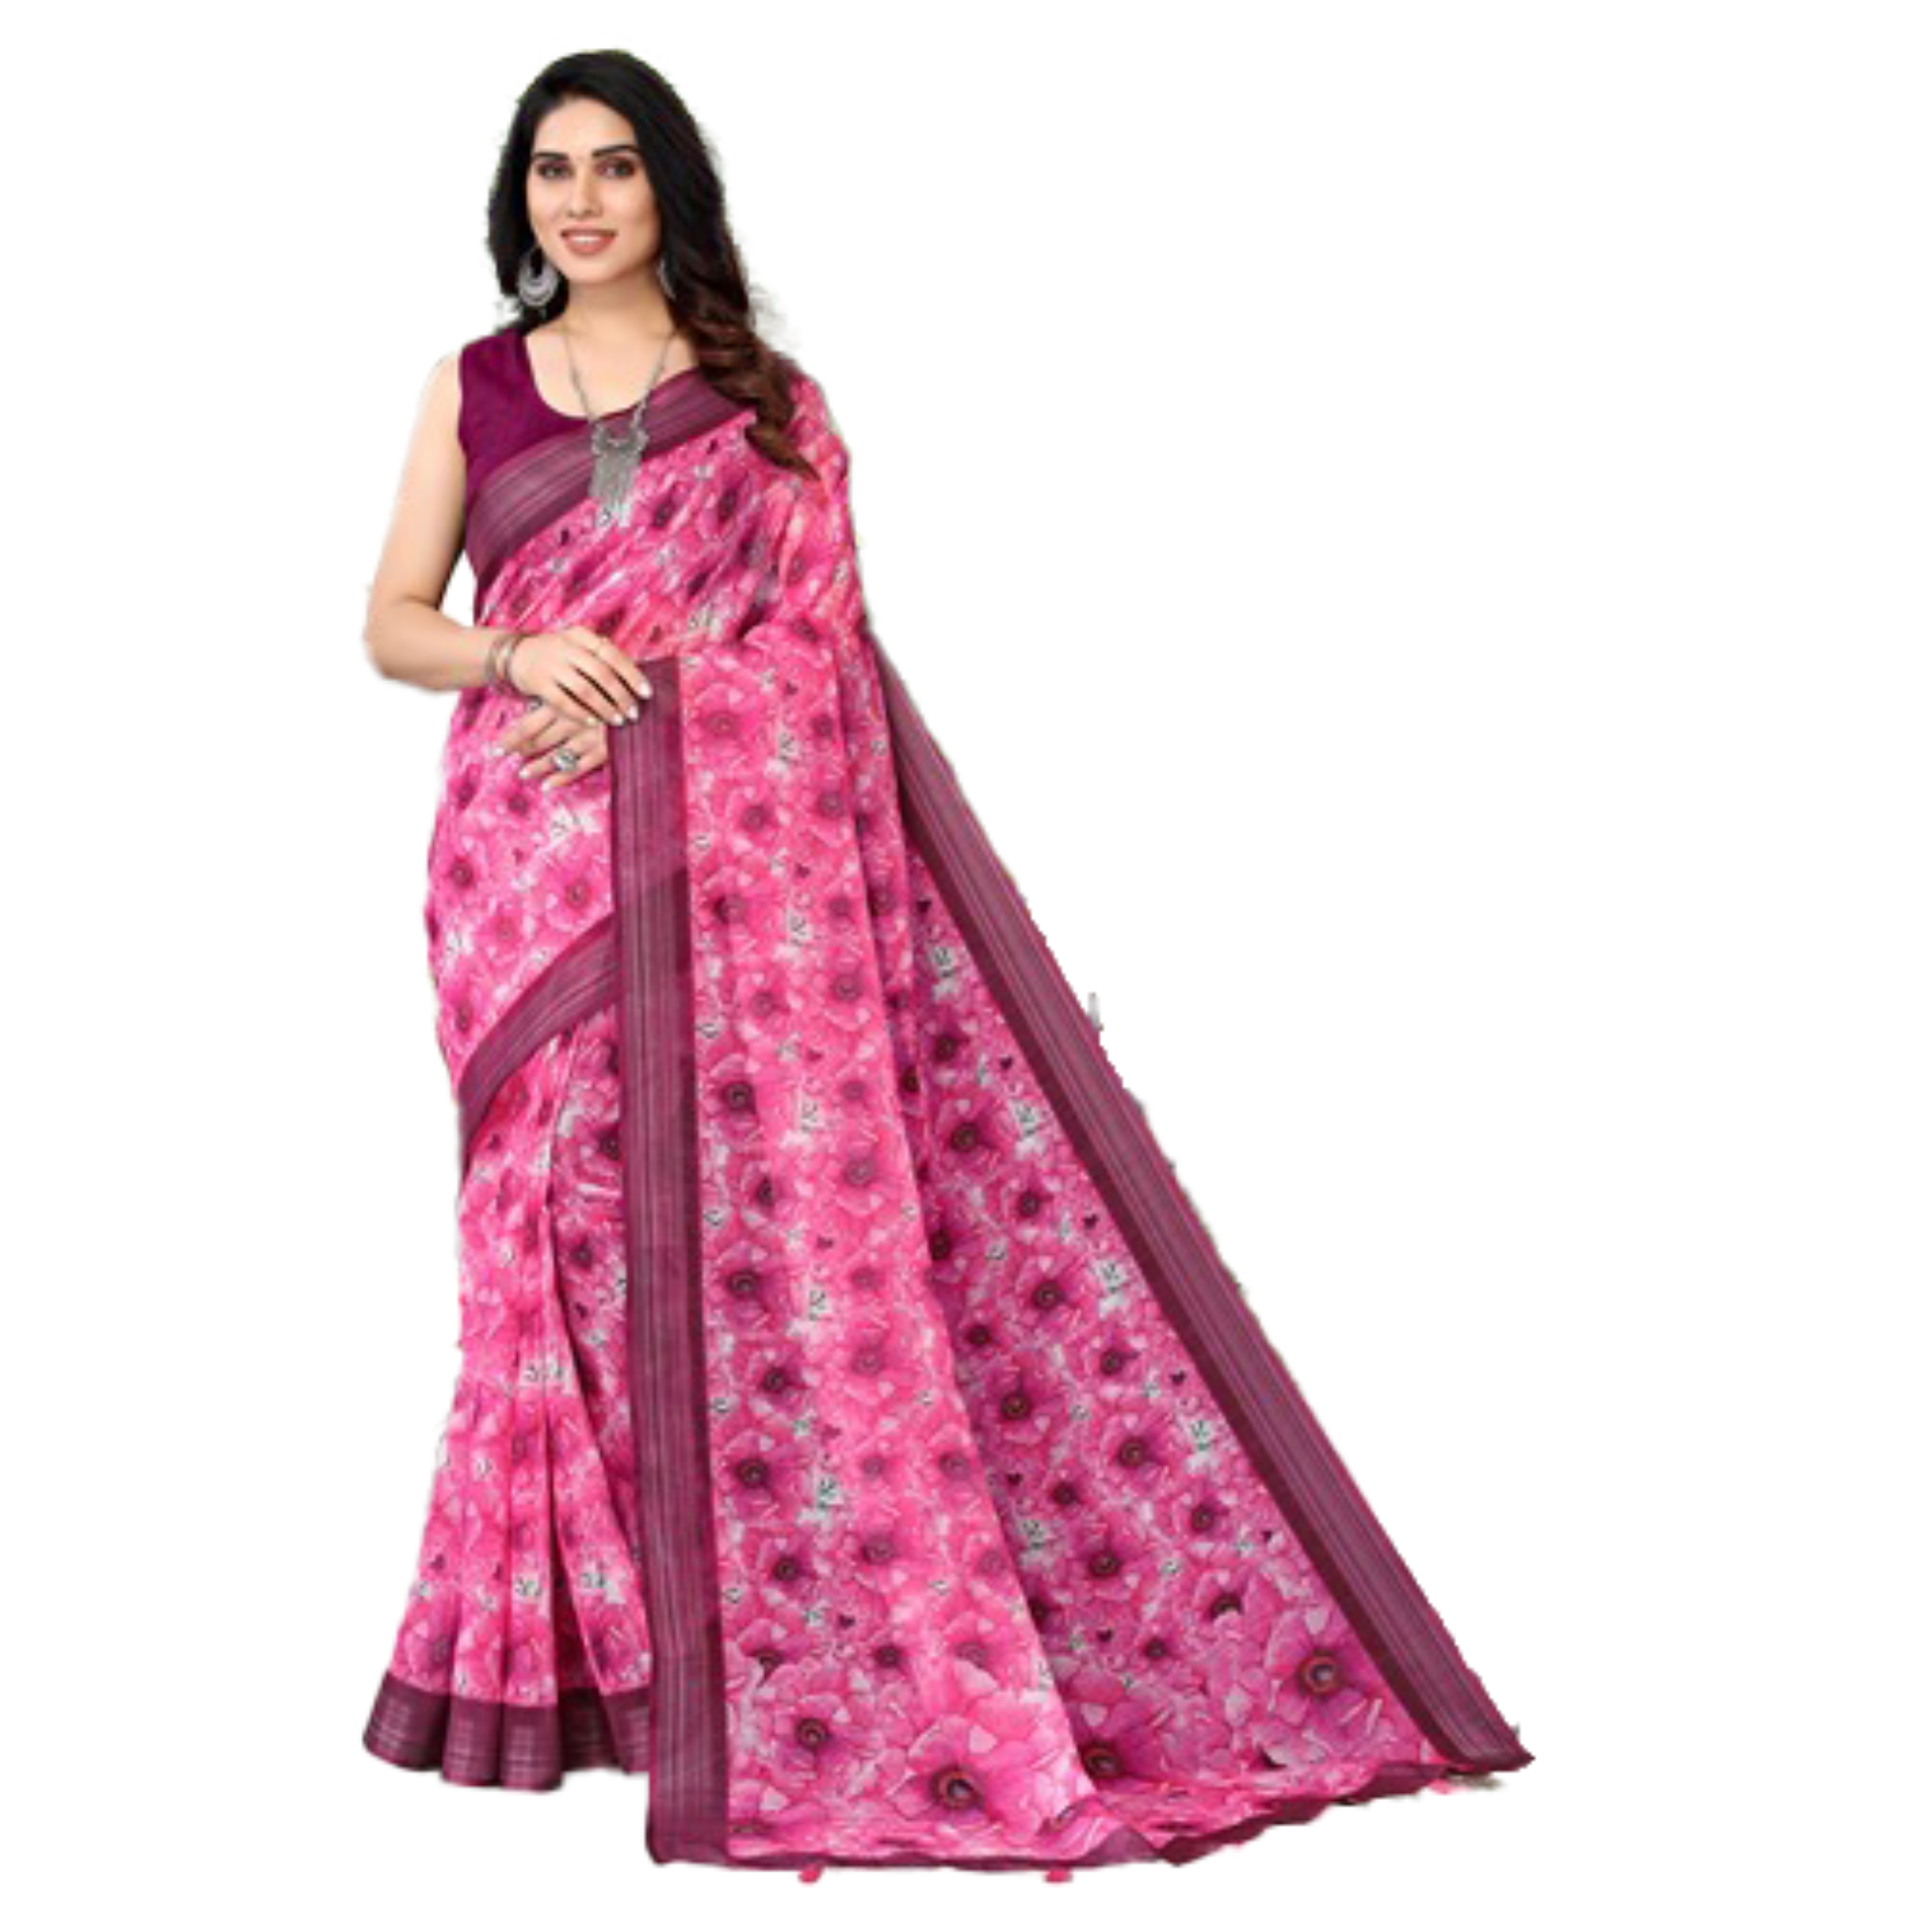 Women's Pink printed Saree with brown border and running Pallu. - TheHangr